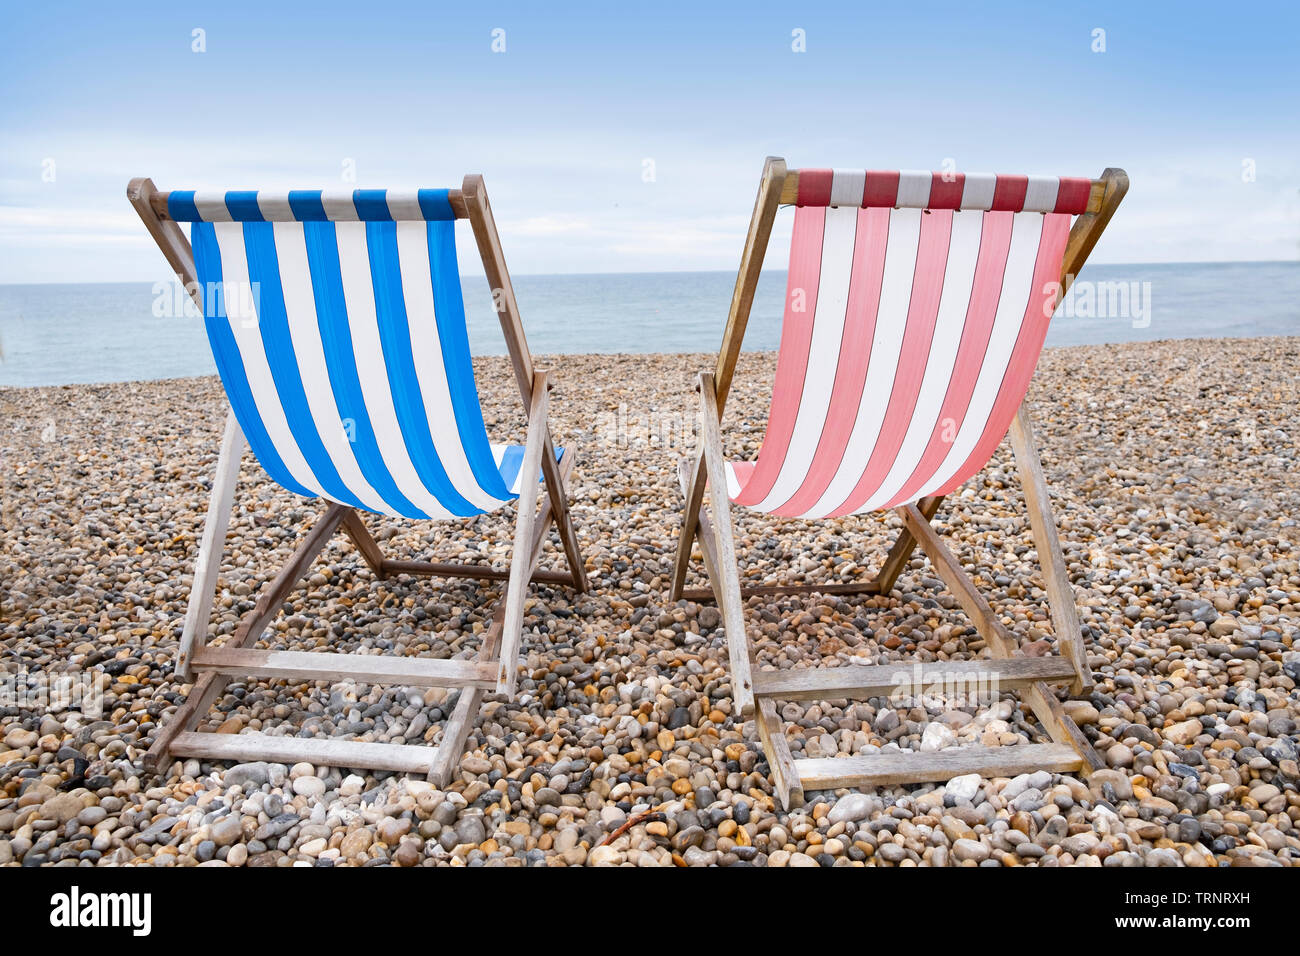 Deckchairs on beach, typical english seaside holiday scene, red and blue stripes representing main political party of labour or conservative Stock Photo